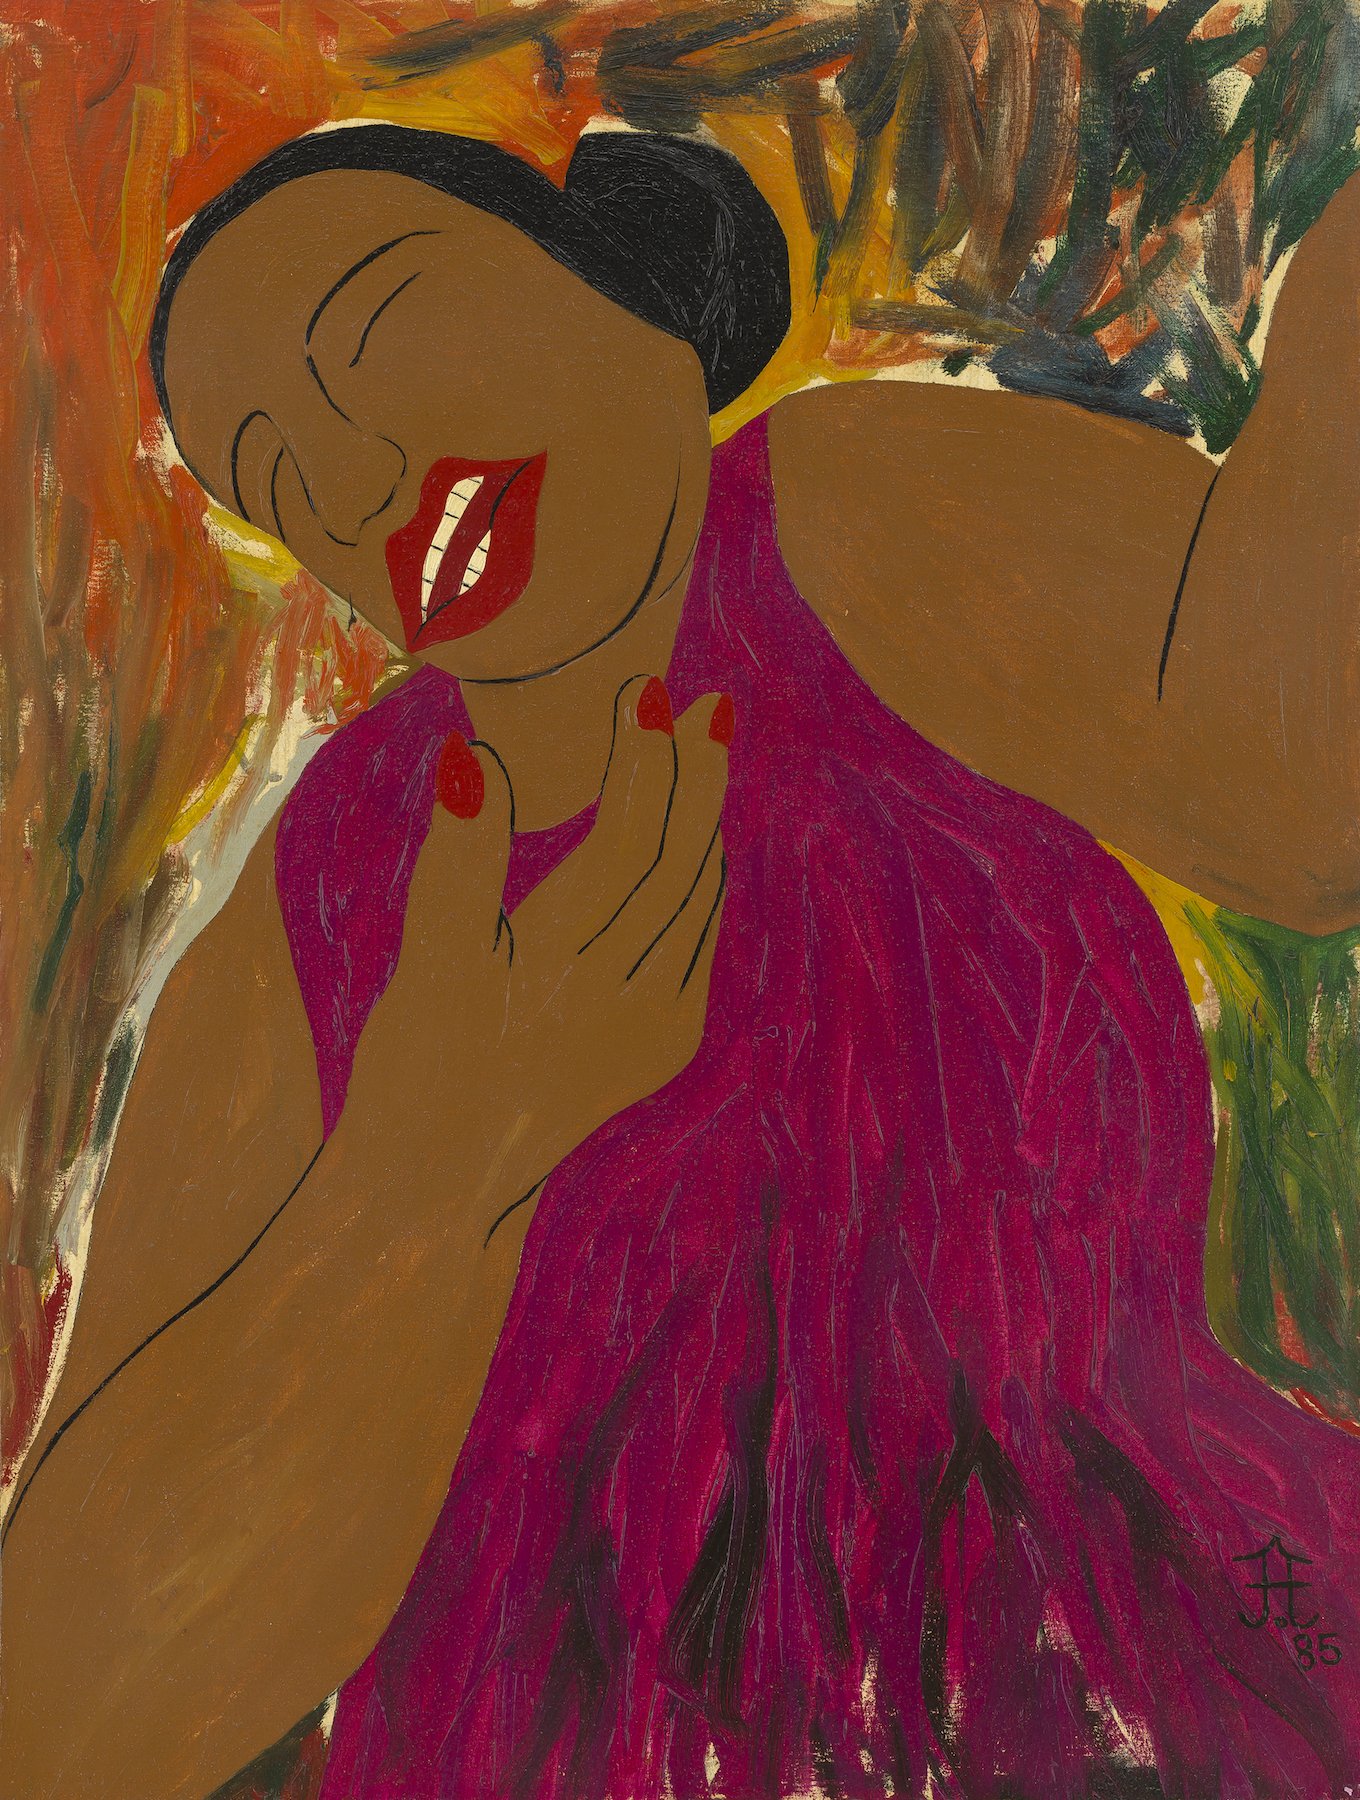 Waist up portrait of Bessie Smith singing in red lipstick and nails, and a magenta dress.